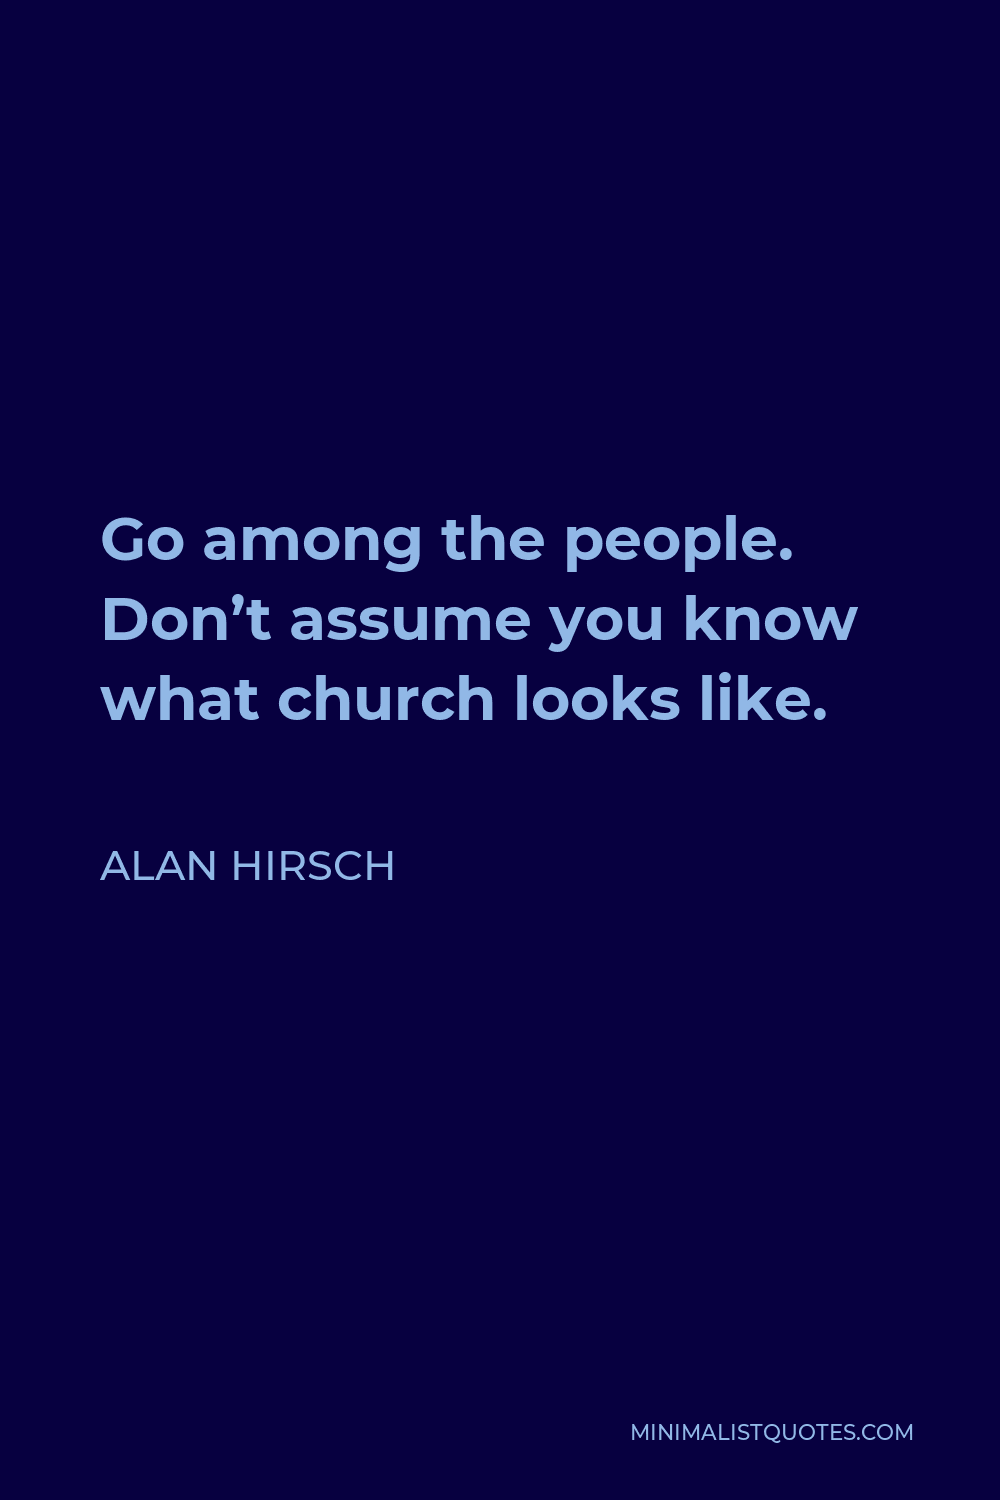 Alan Hirsch Quote - Go among the people. Don’t assume you know what church looks like.